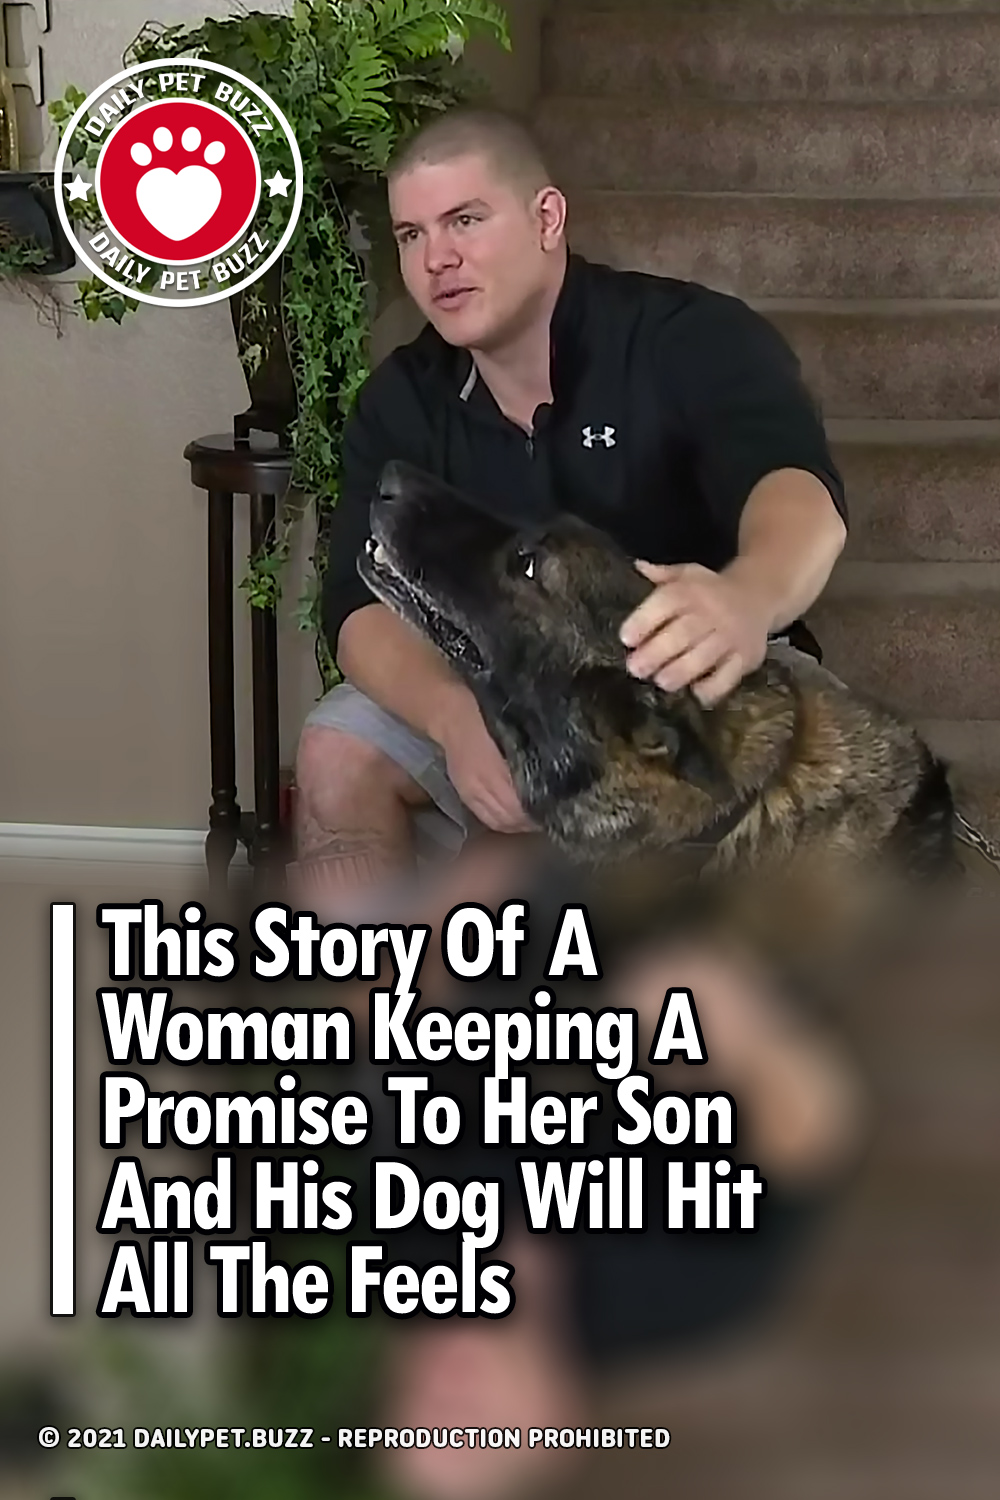 This Story Of A Woman Keeping A Promise To Her Son And His Dog Will Hit All The Feels